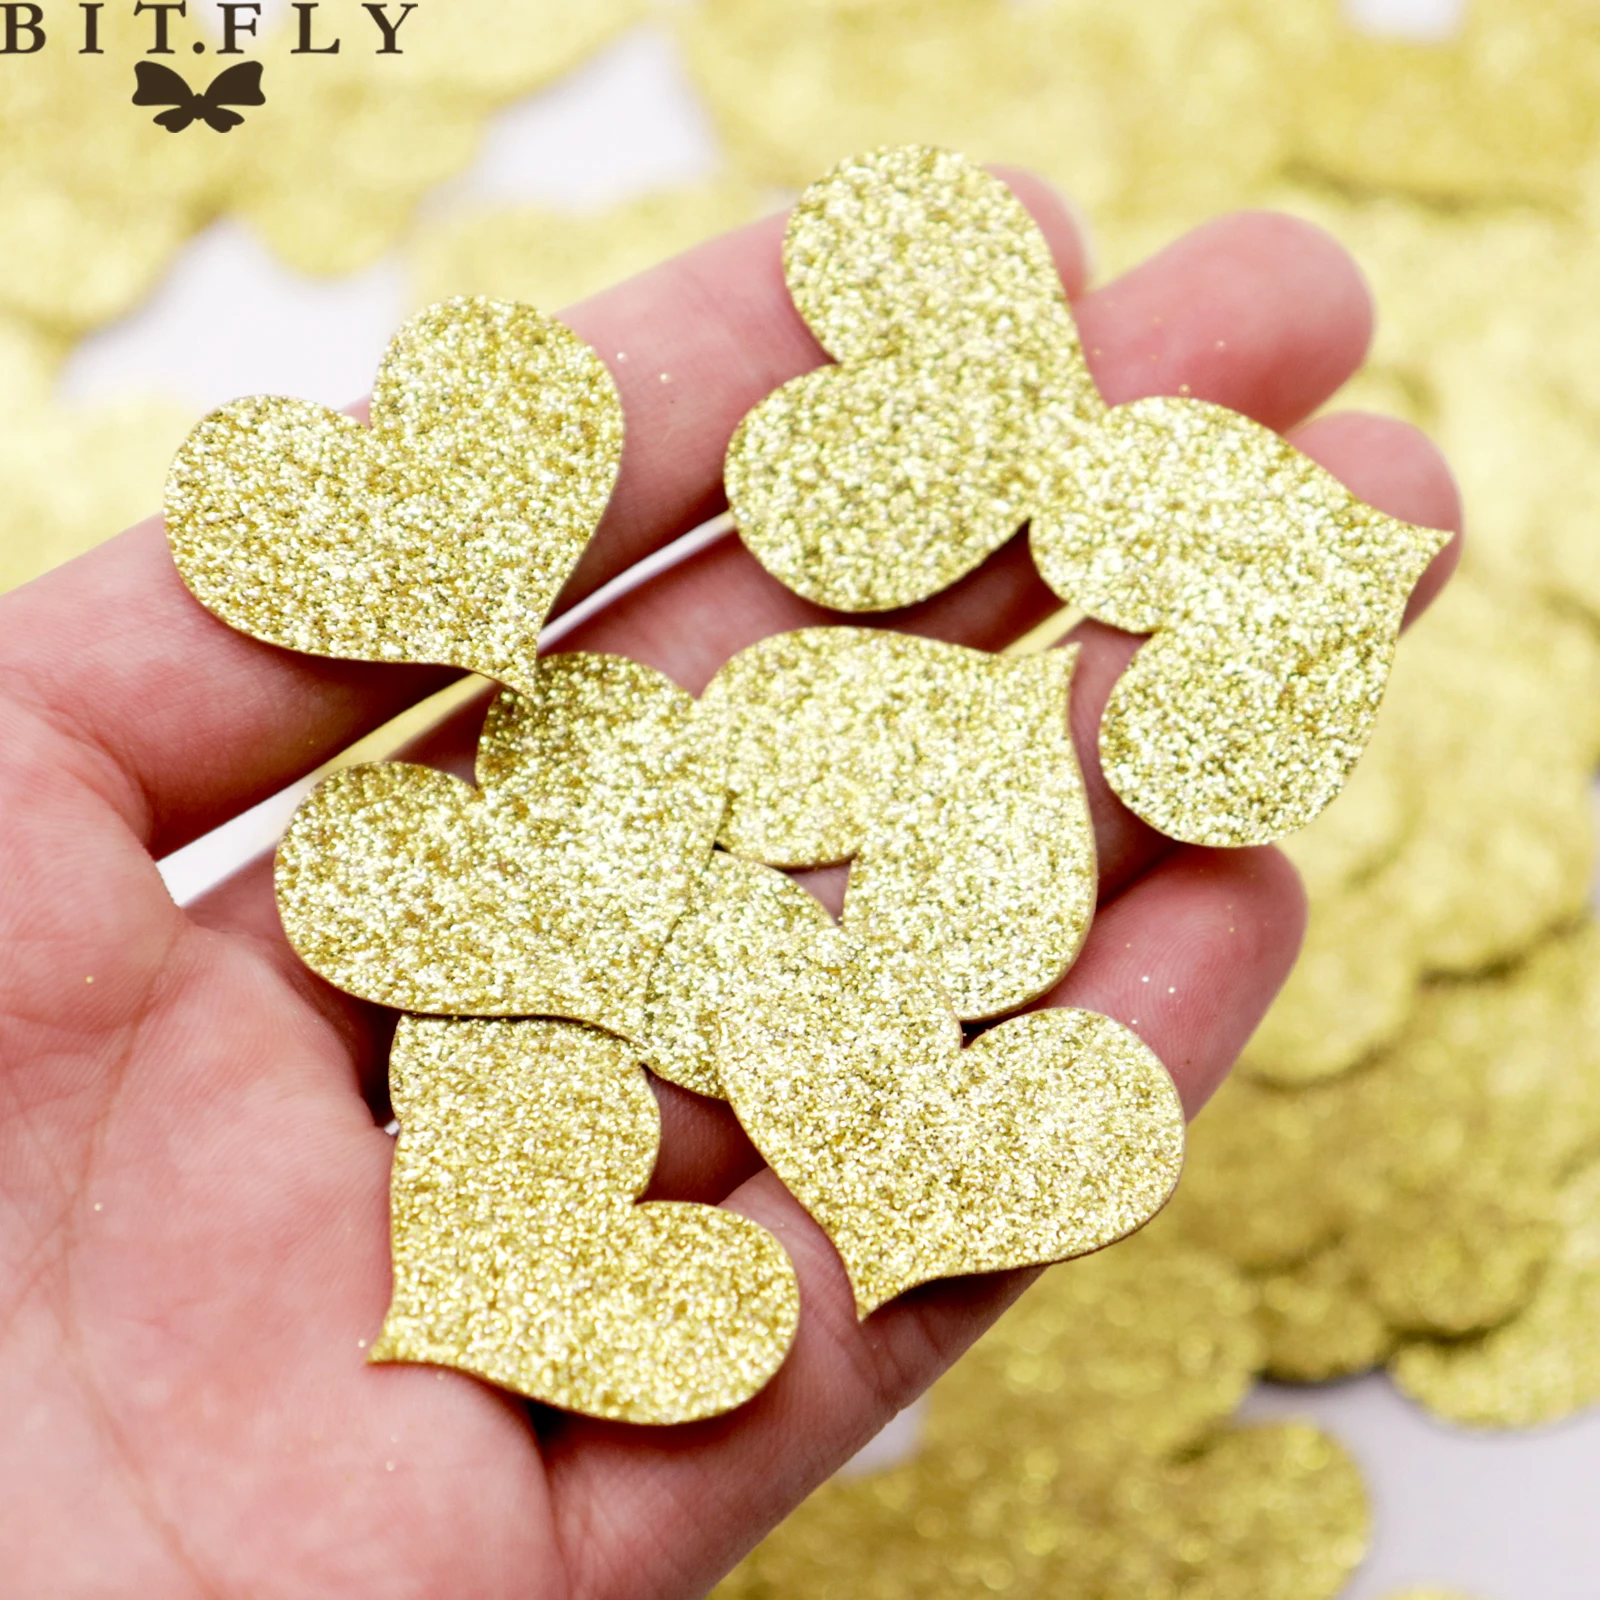 100pcs//pack Glitter Paper Confetti Gold Circle Heart Diamond Ring Crown Stars for for Party Decor and Table Decor Rose Gold Circle Diamond Ring Crown